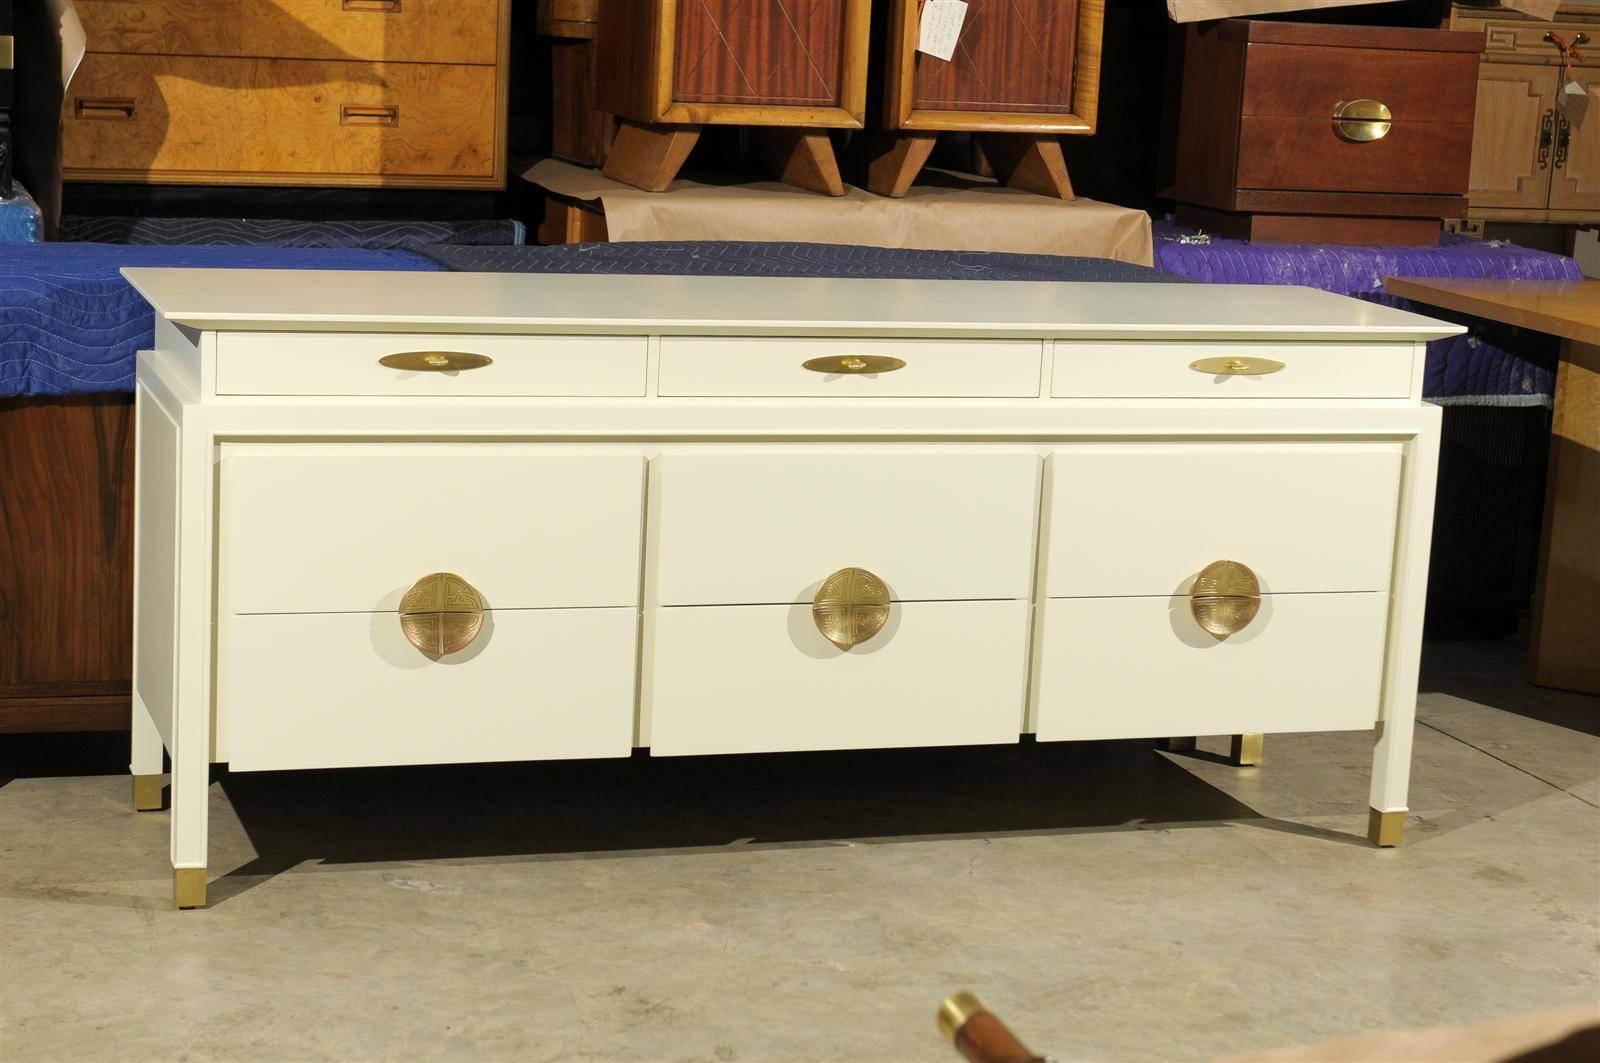 A fabulous, highly unusual nine (9) drawer chest by Johnson Furniture Company, circa 1960's. Exceptional mahogany case construction with lovely detail. Gorgeous solid brass hardware accent the drawers. This chest displays the characteristics found